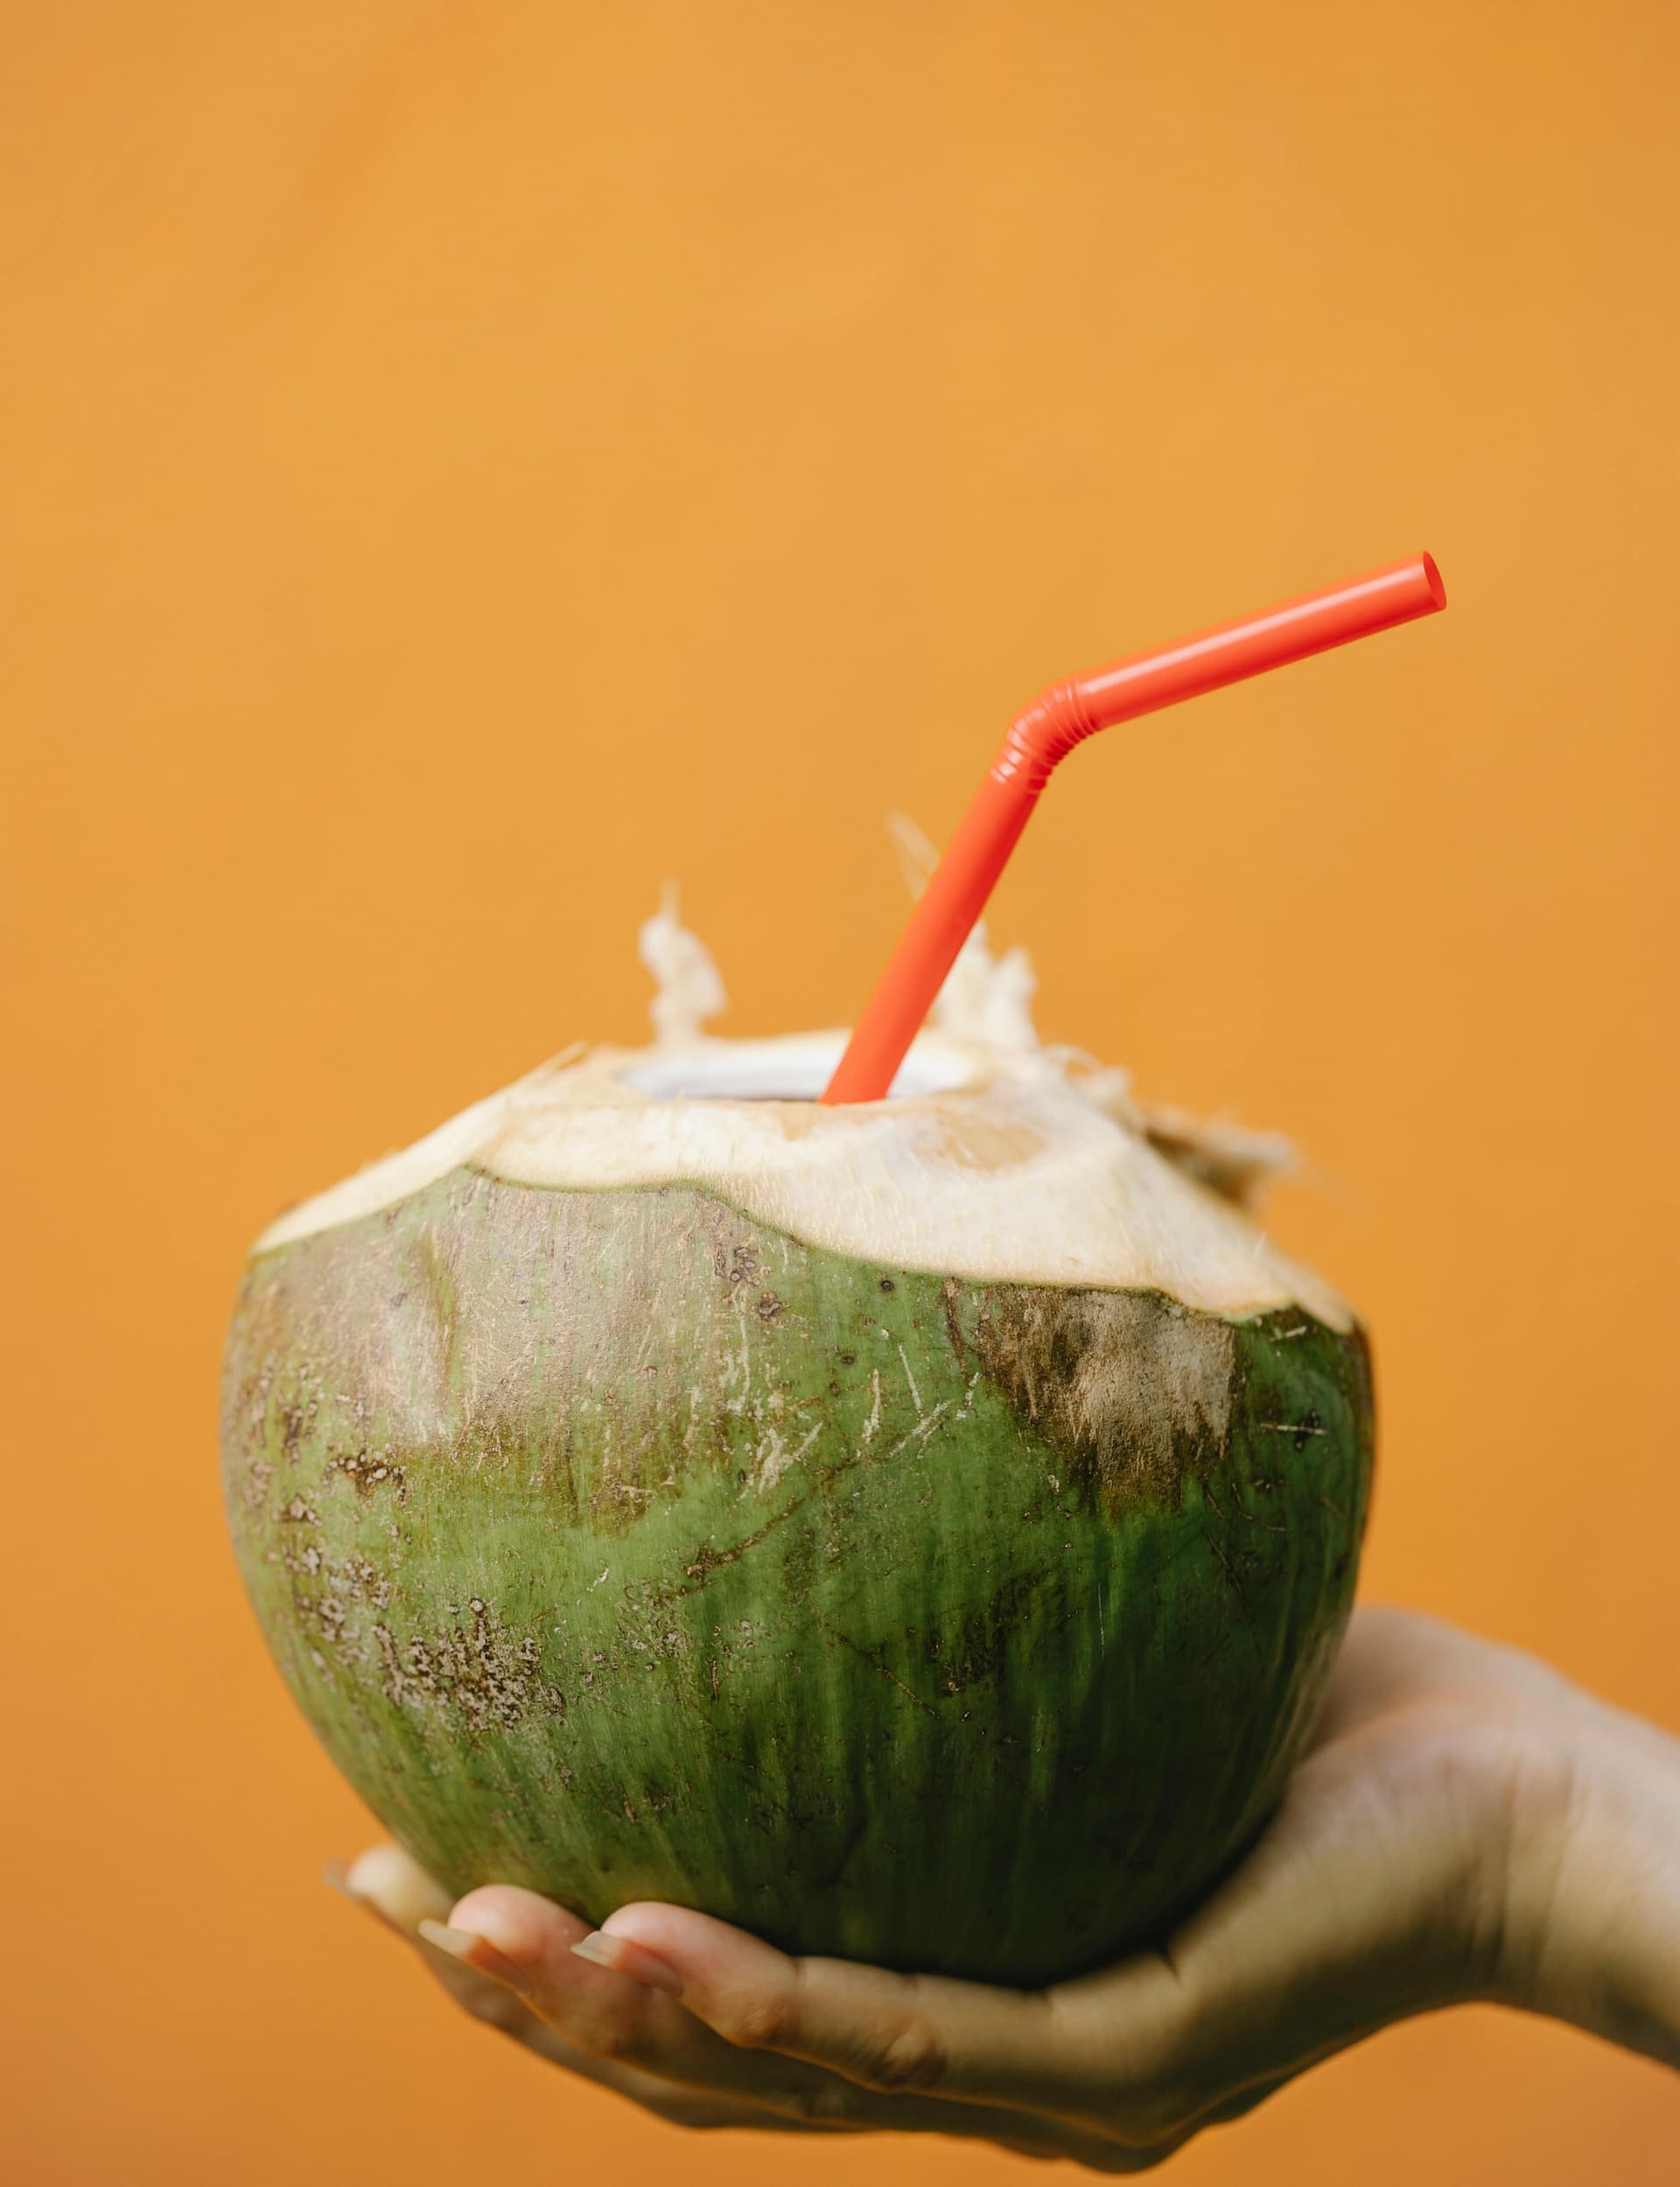 Coconut Water vs Sports Drinks: Which is Better for Rehydration After a Night Out?